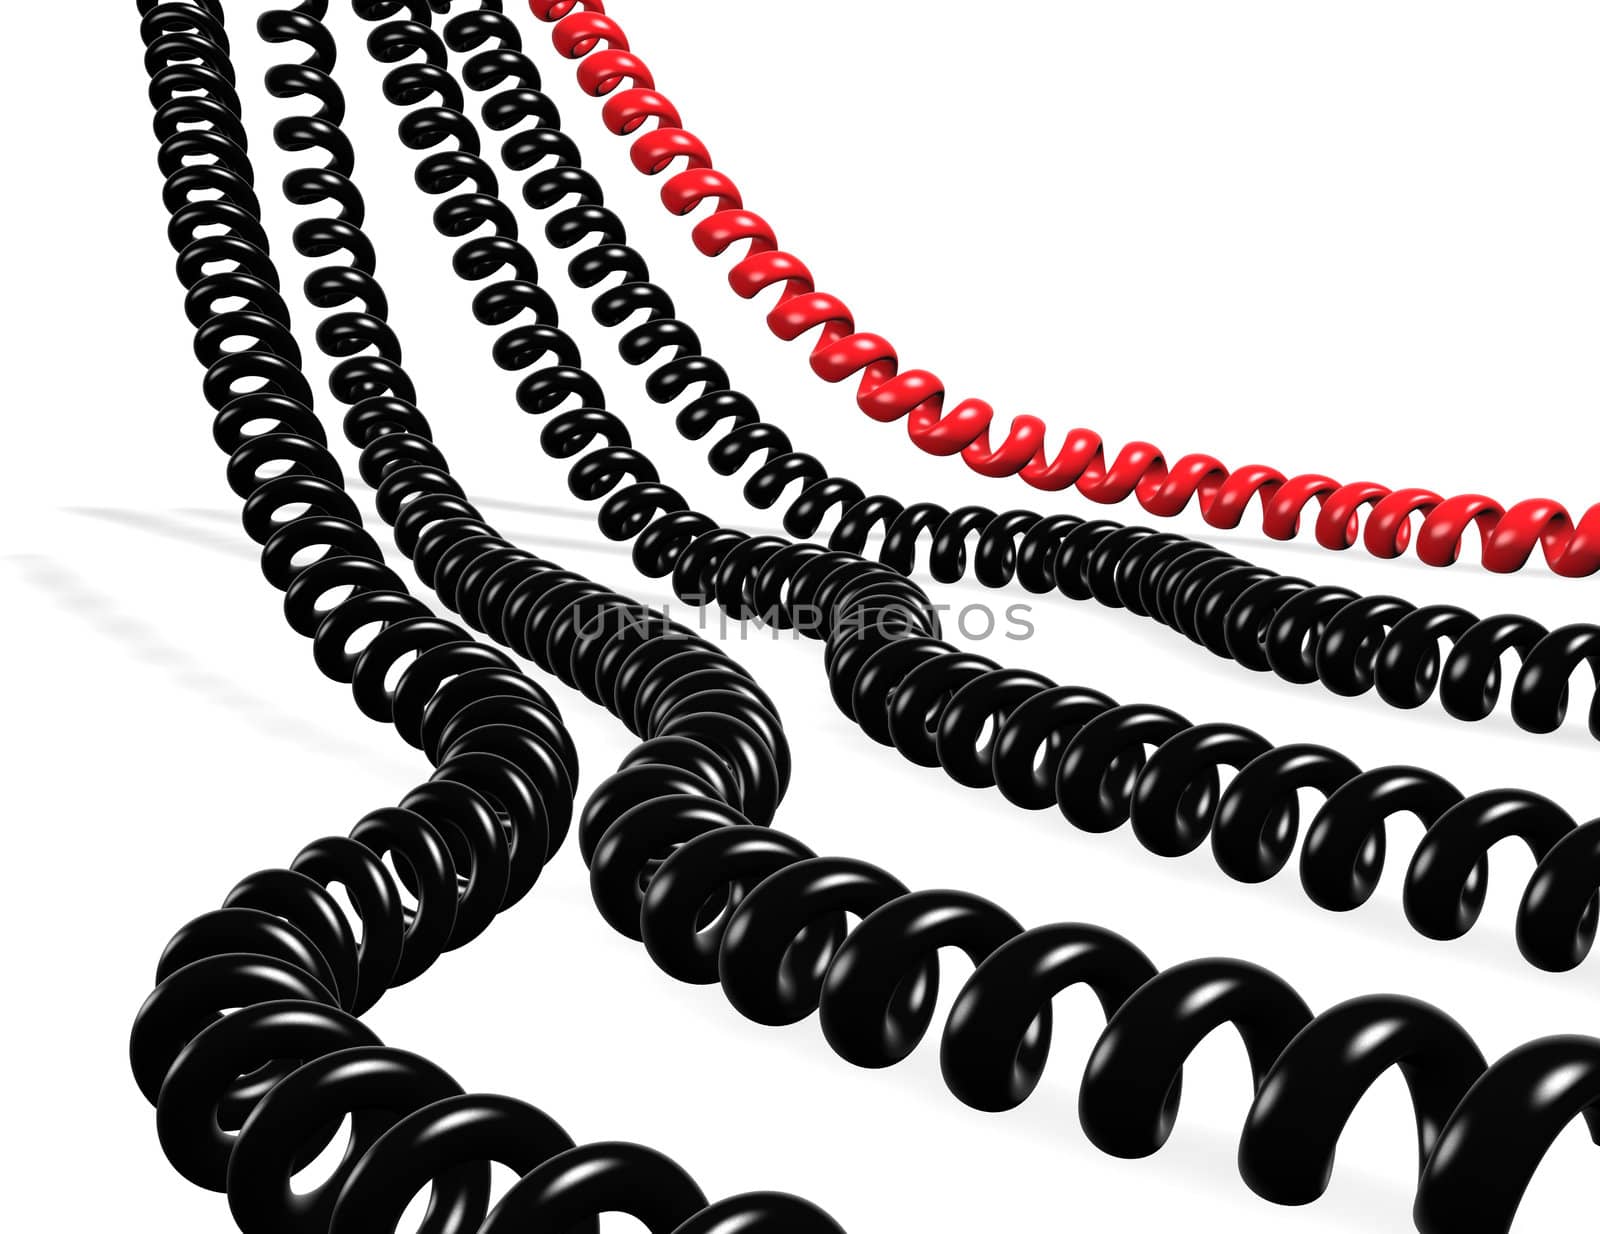 Several telephone cables red and black isolated in white